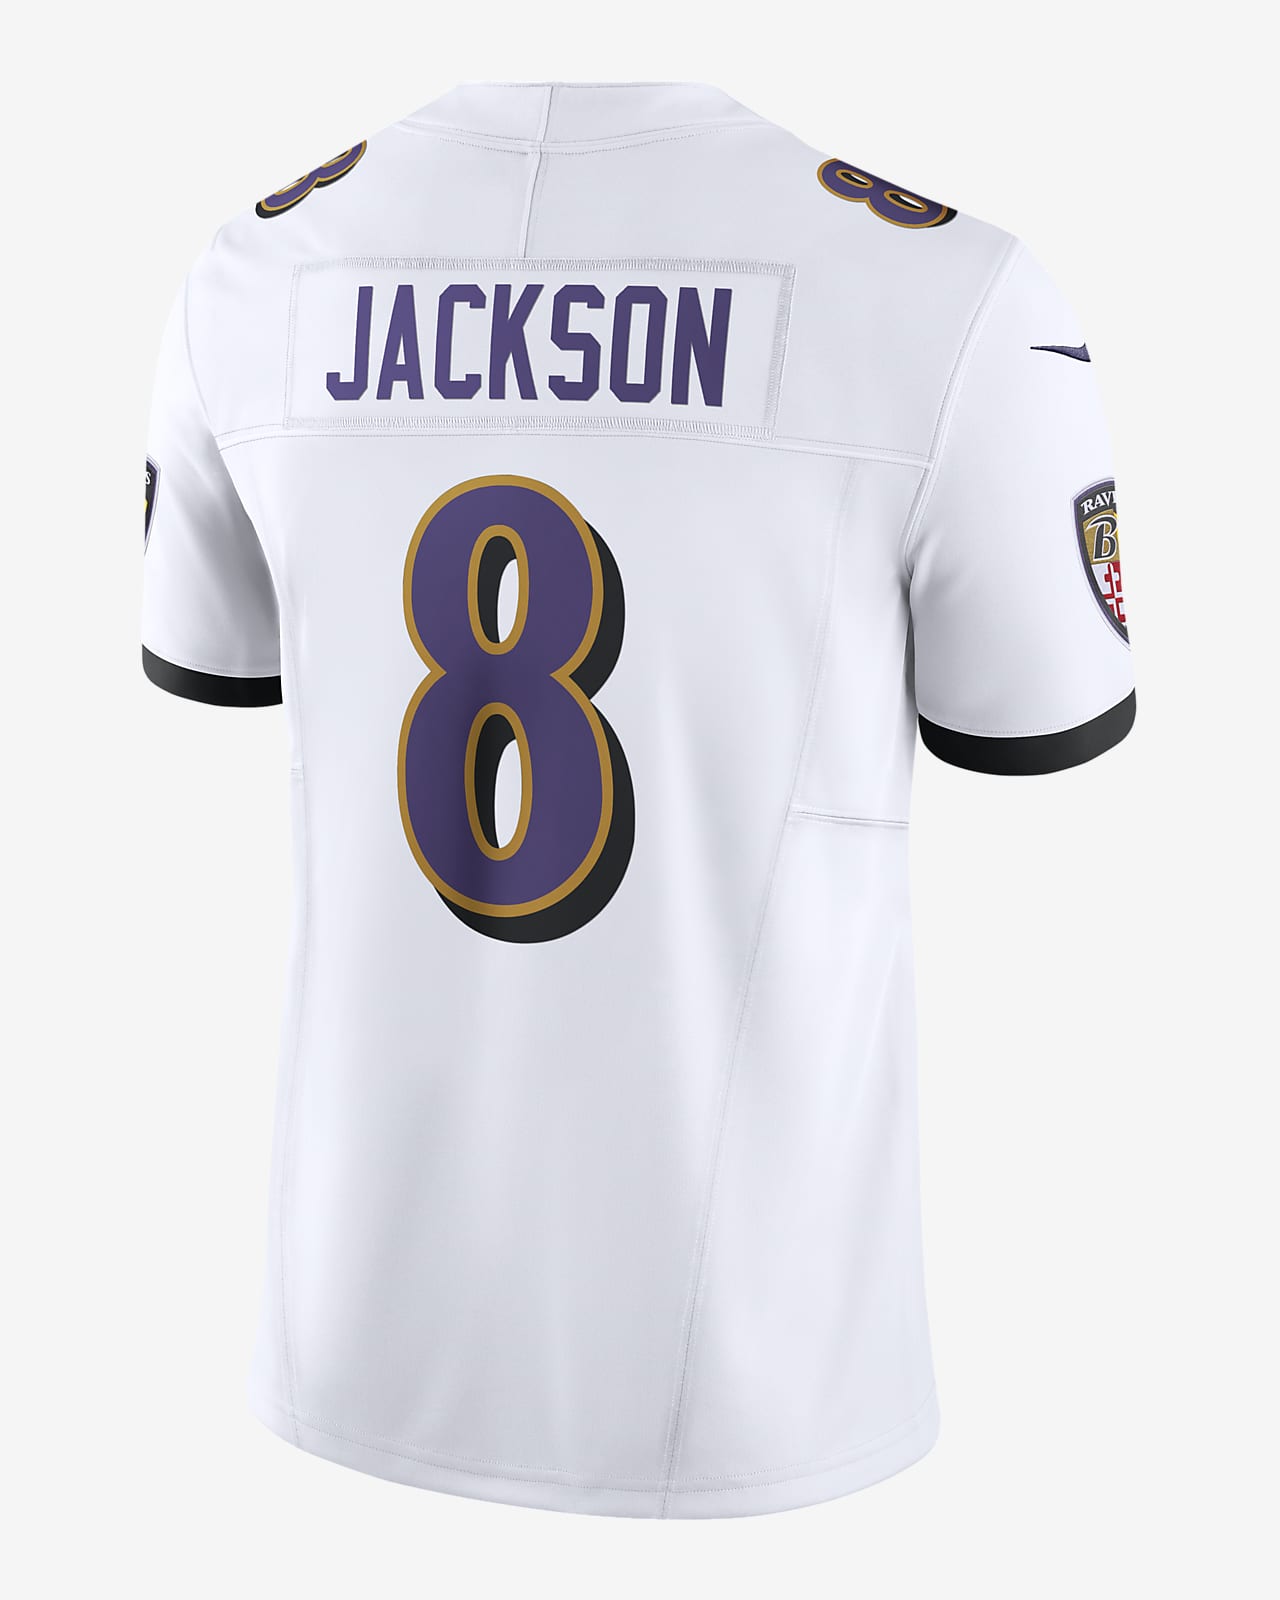 ravens jersey in store